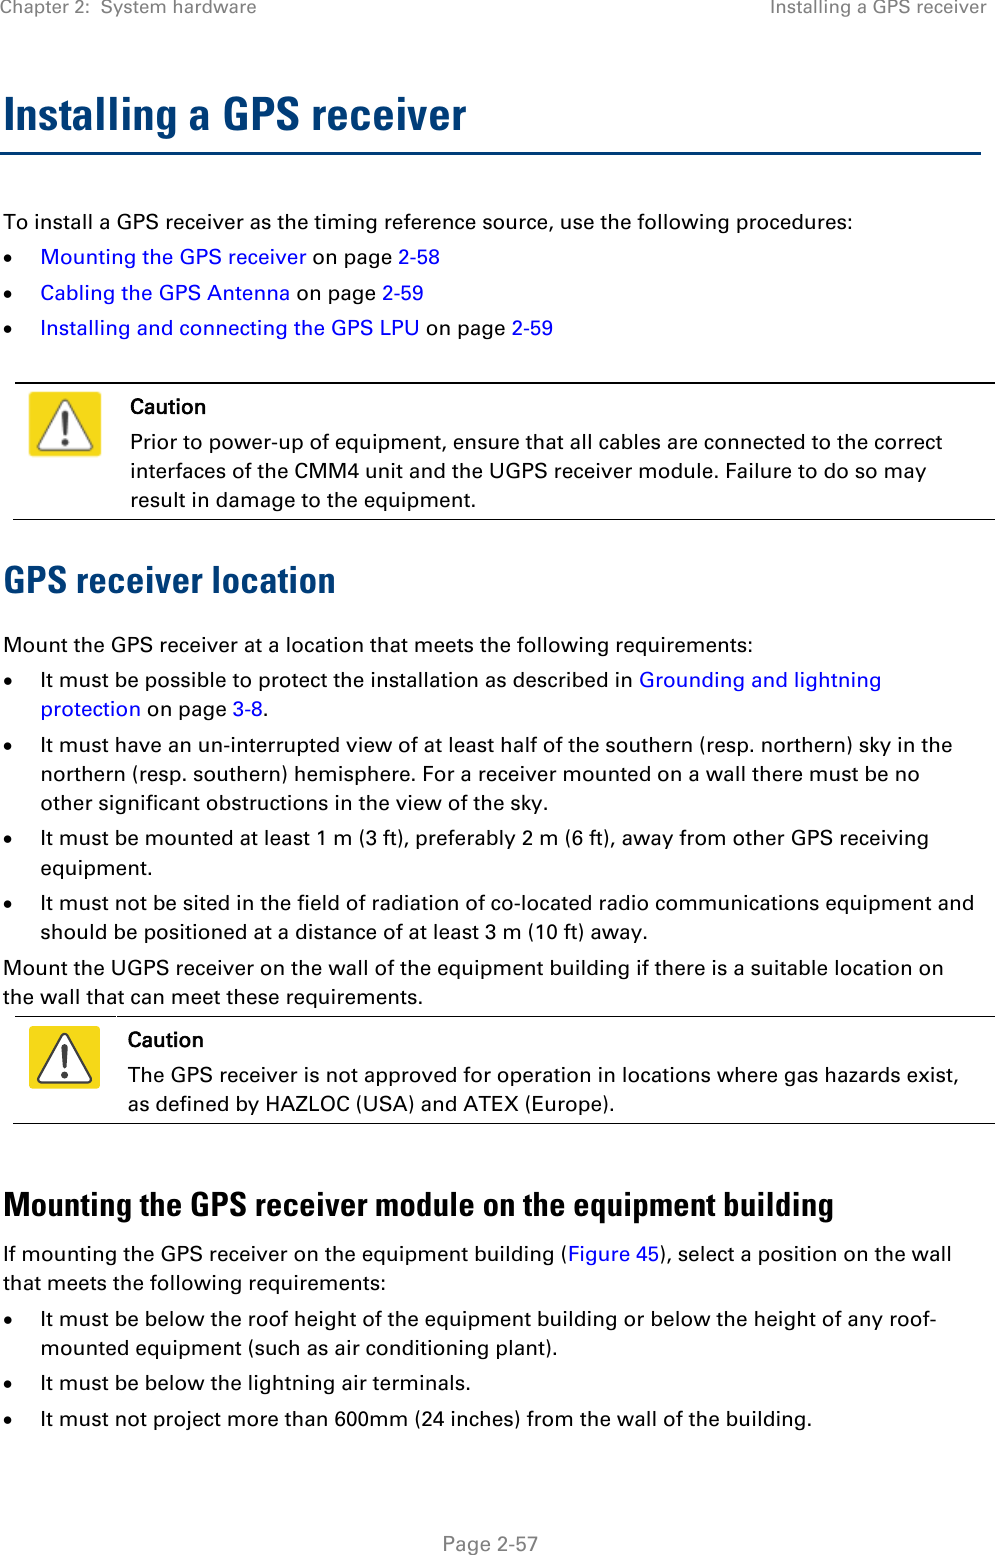 Chapter 2:  System hardware Installing a GPS receiver   Page 2-57 Installing a GPS receiver  To install a GPS receiver as the timing reference source, use the following procedures: • Mounting the GPS receiver on page 2-58 • Cabling the GPS Antenna on page 2-59 • Installing and connecting the GPS LPU on page 2-59   Caution Prior to power-up of equipment, ensure that all cables are connected to the correct interfaces of the CMM4 unit and the UGPS receiver module. Failure to do so may result in damage to the equipment. GPS receiver location Mount the GPS receiver at a location that meets the following requirements: • It must be possible to protect the installation as described in Grounding and lightning protection on page 3-8. • It must have an un-interrupted view of at least half of the southern (resp. northern) sky in the northern (resp. southern) hemisphere. For a receiver mounted on a wall there must be no other significant obstructions in the view of the sky. • It must be mounted at least 1 m (3 ft), preferably 2 m (6 ft), away from other GPS receiving equipment. • It must not be sited in the field of radiation of co-located radio communications equipment and should be positioned at a distance of at least 3 m (10 ft) away. Mount the UGPS receiver on the wall of the equipment building if there is a suitable location on the wall that can meet these requirements.   Caution The GPS receiver is not approved for operation in locations where gas hazards exist, as defined by HAZLOC (USA) and ATEX (Europe).  Mounting the GPS receiver module on the equipment building If mounting the GPS receiver on the equipment building (Figure 45), select a position on the wall that meets the following requirements: • It must be below the roof height of the equipment building or below the height of any roof-mounted equipment (such as air conditioning plant). • It must be below the lightning air terminals. • It must not project more than 600mm (24 inches) from the wall of the building. 